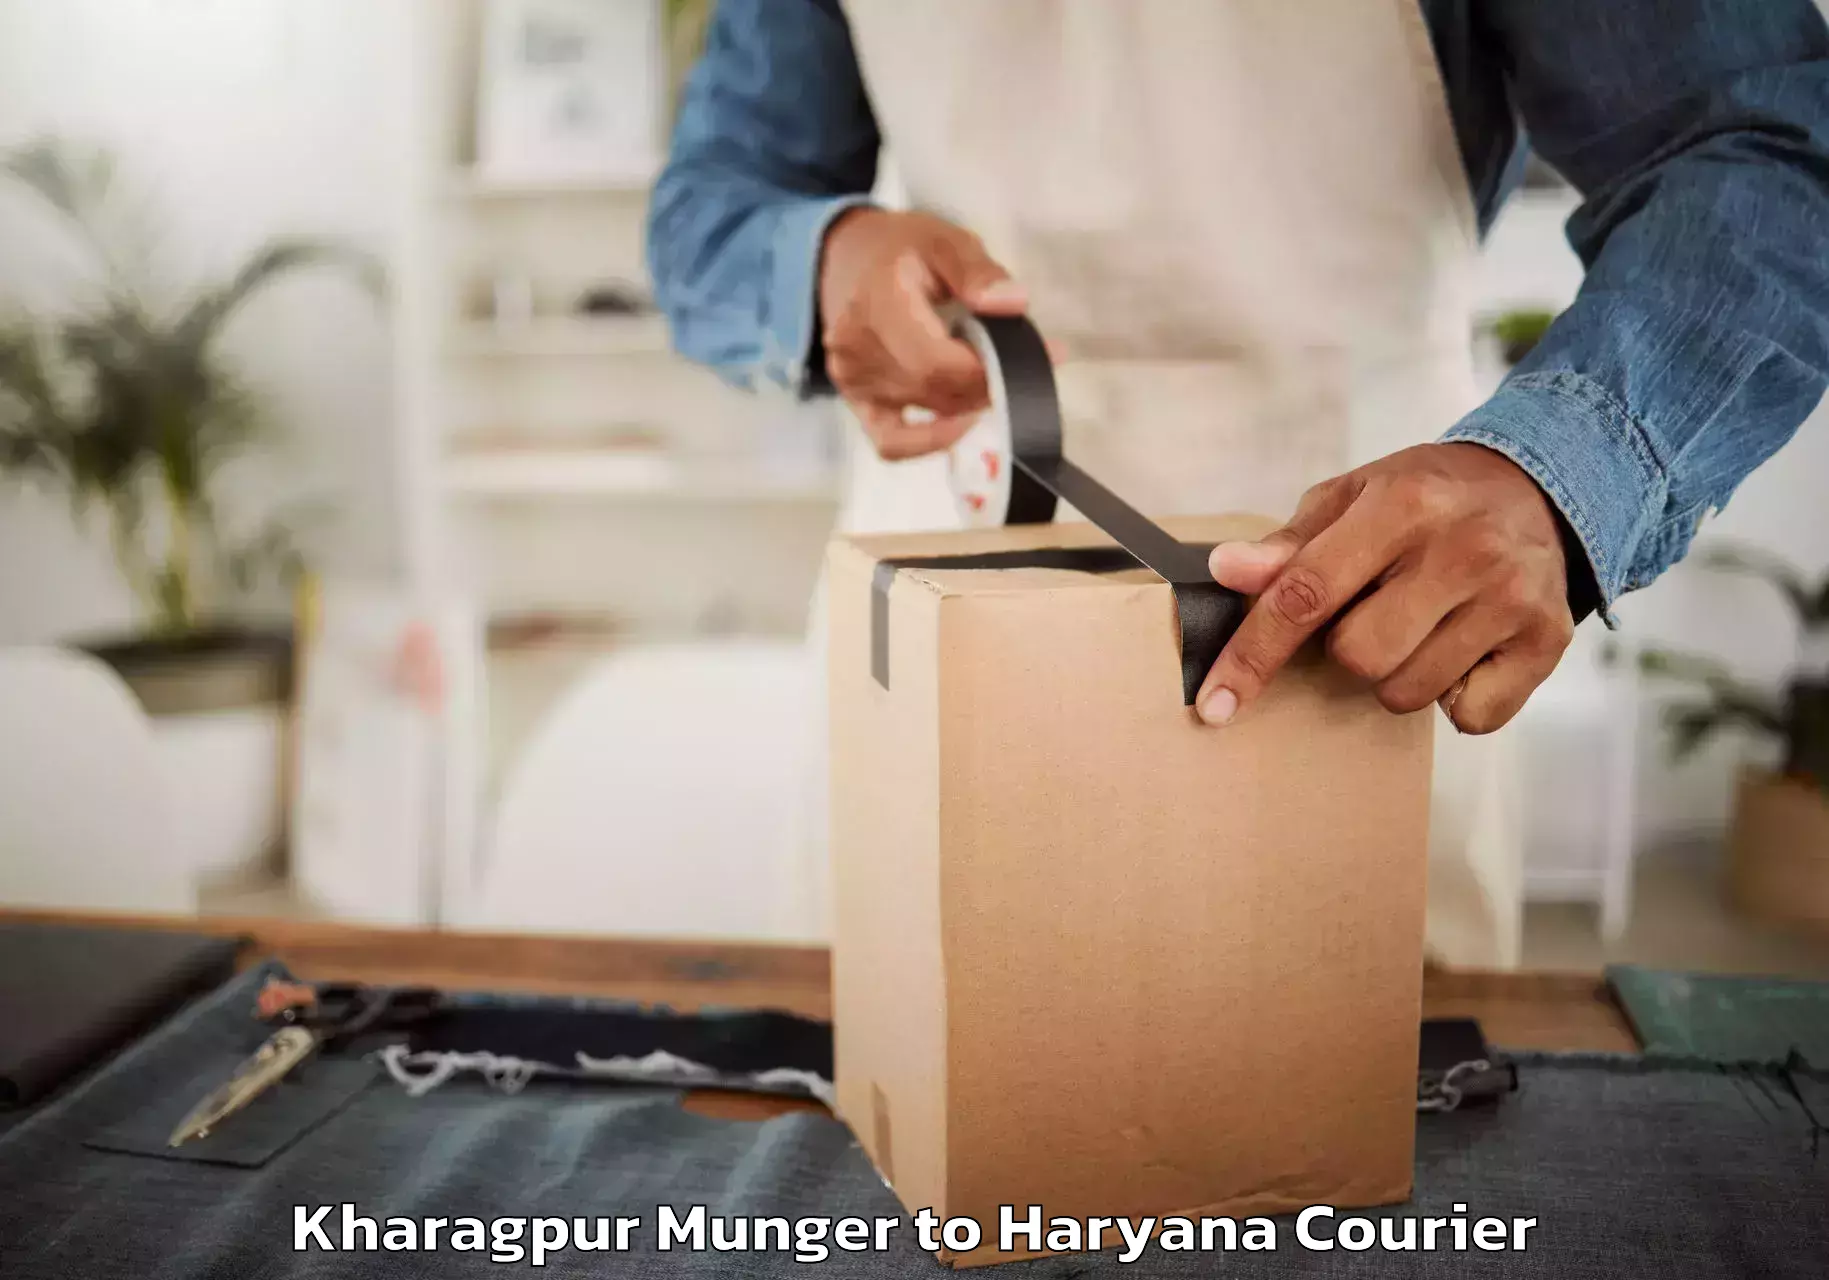 Reliable furniture movers Kharagpur Munger to Nuh